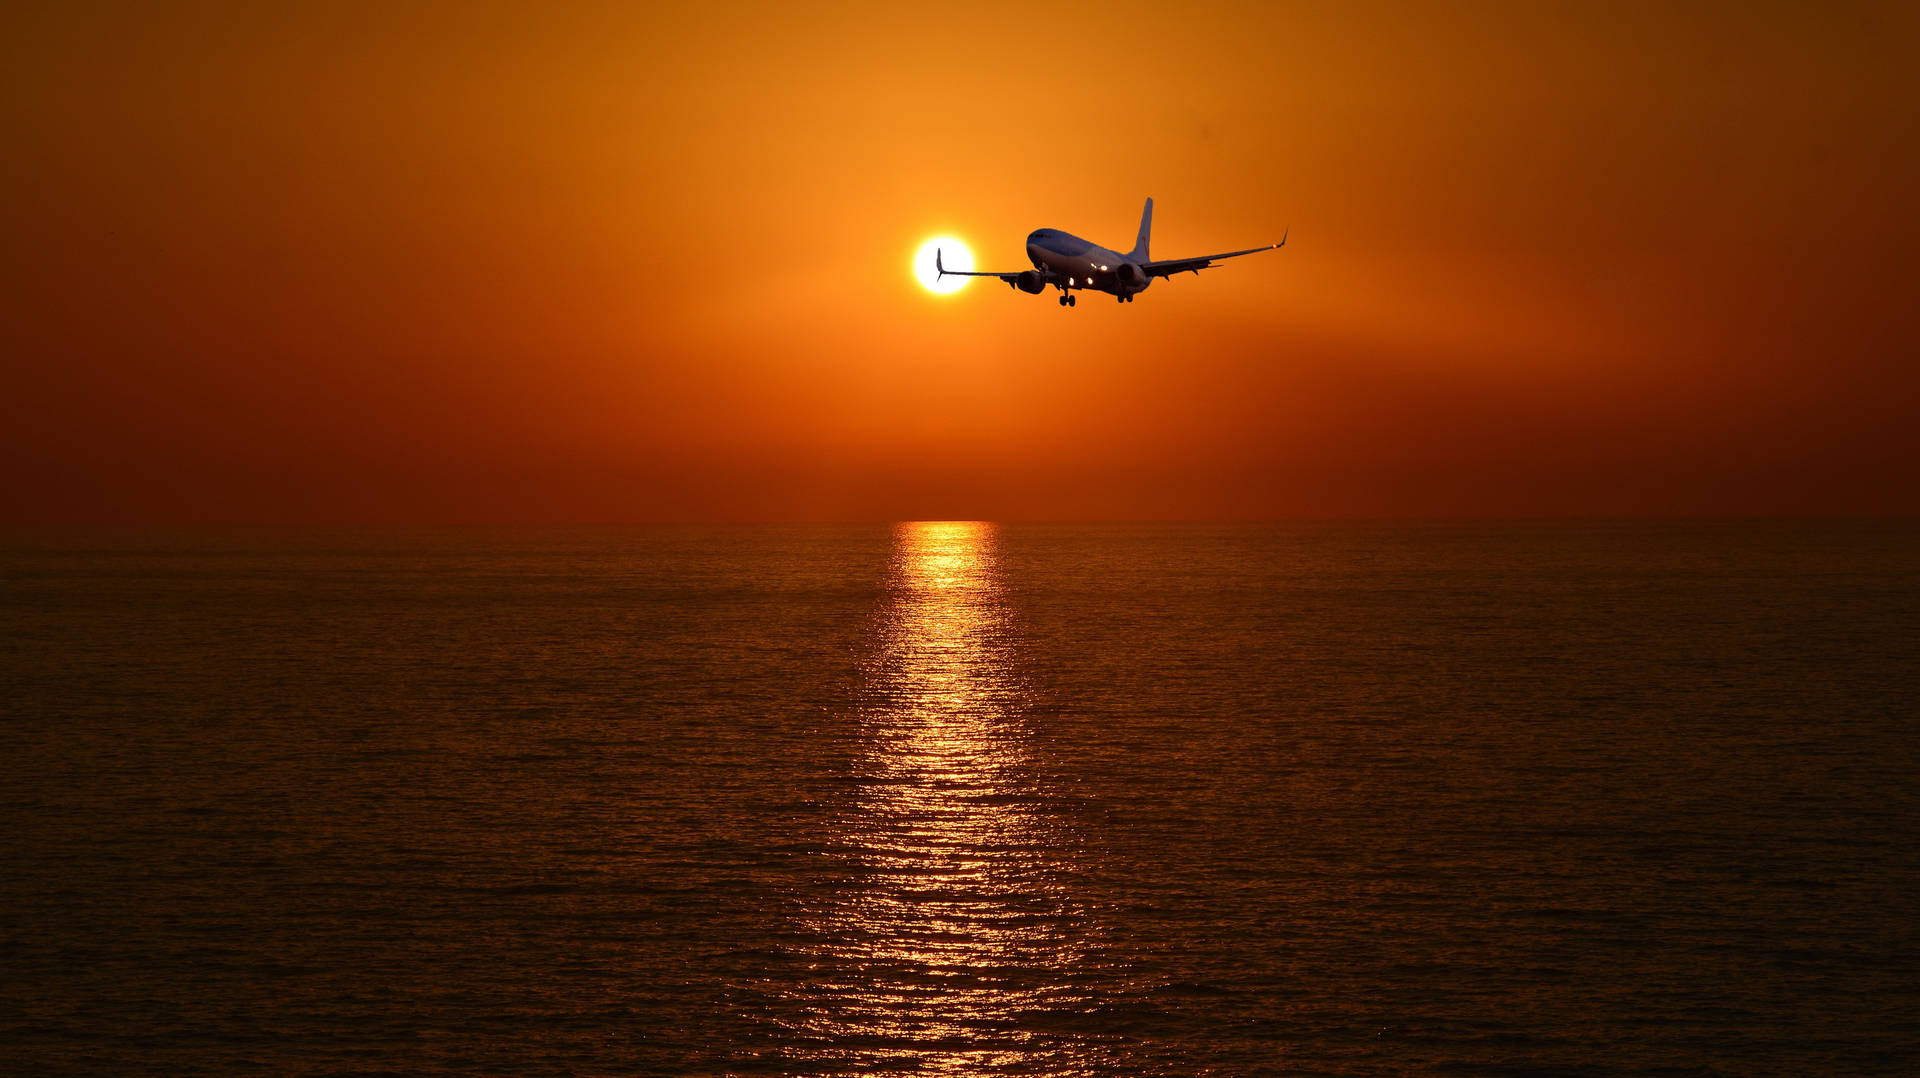 Hd Plane Flying Into Sunset